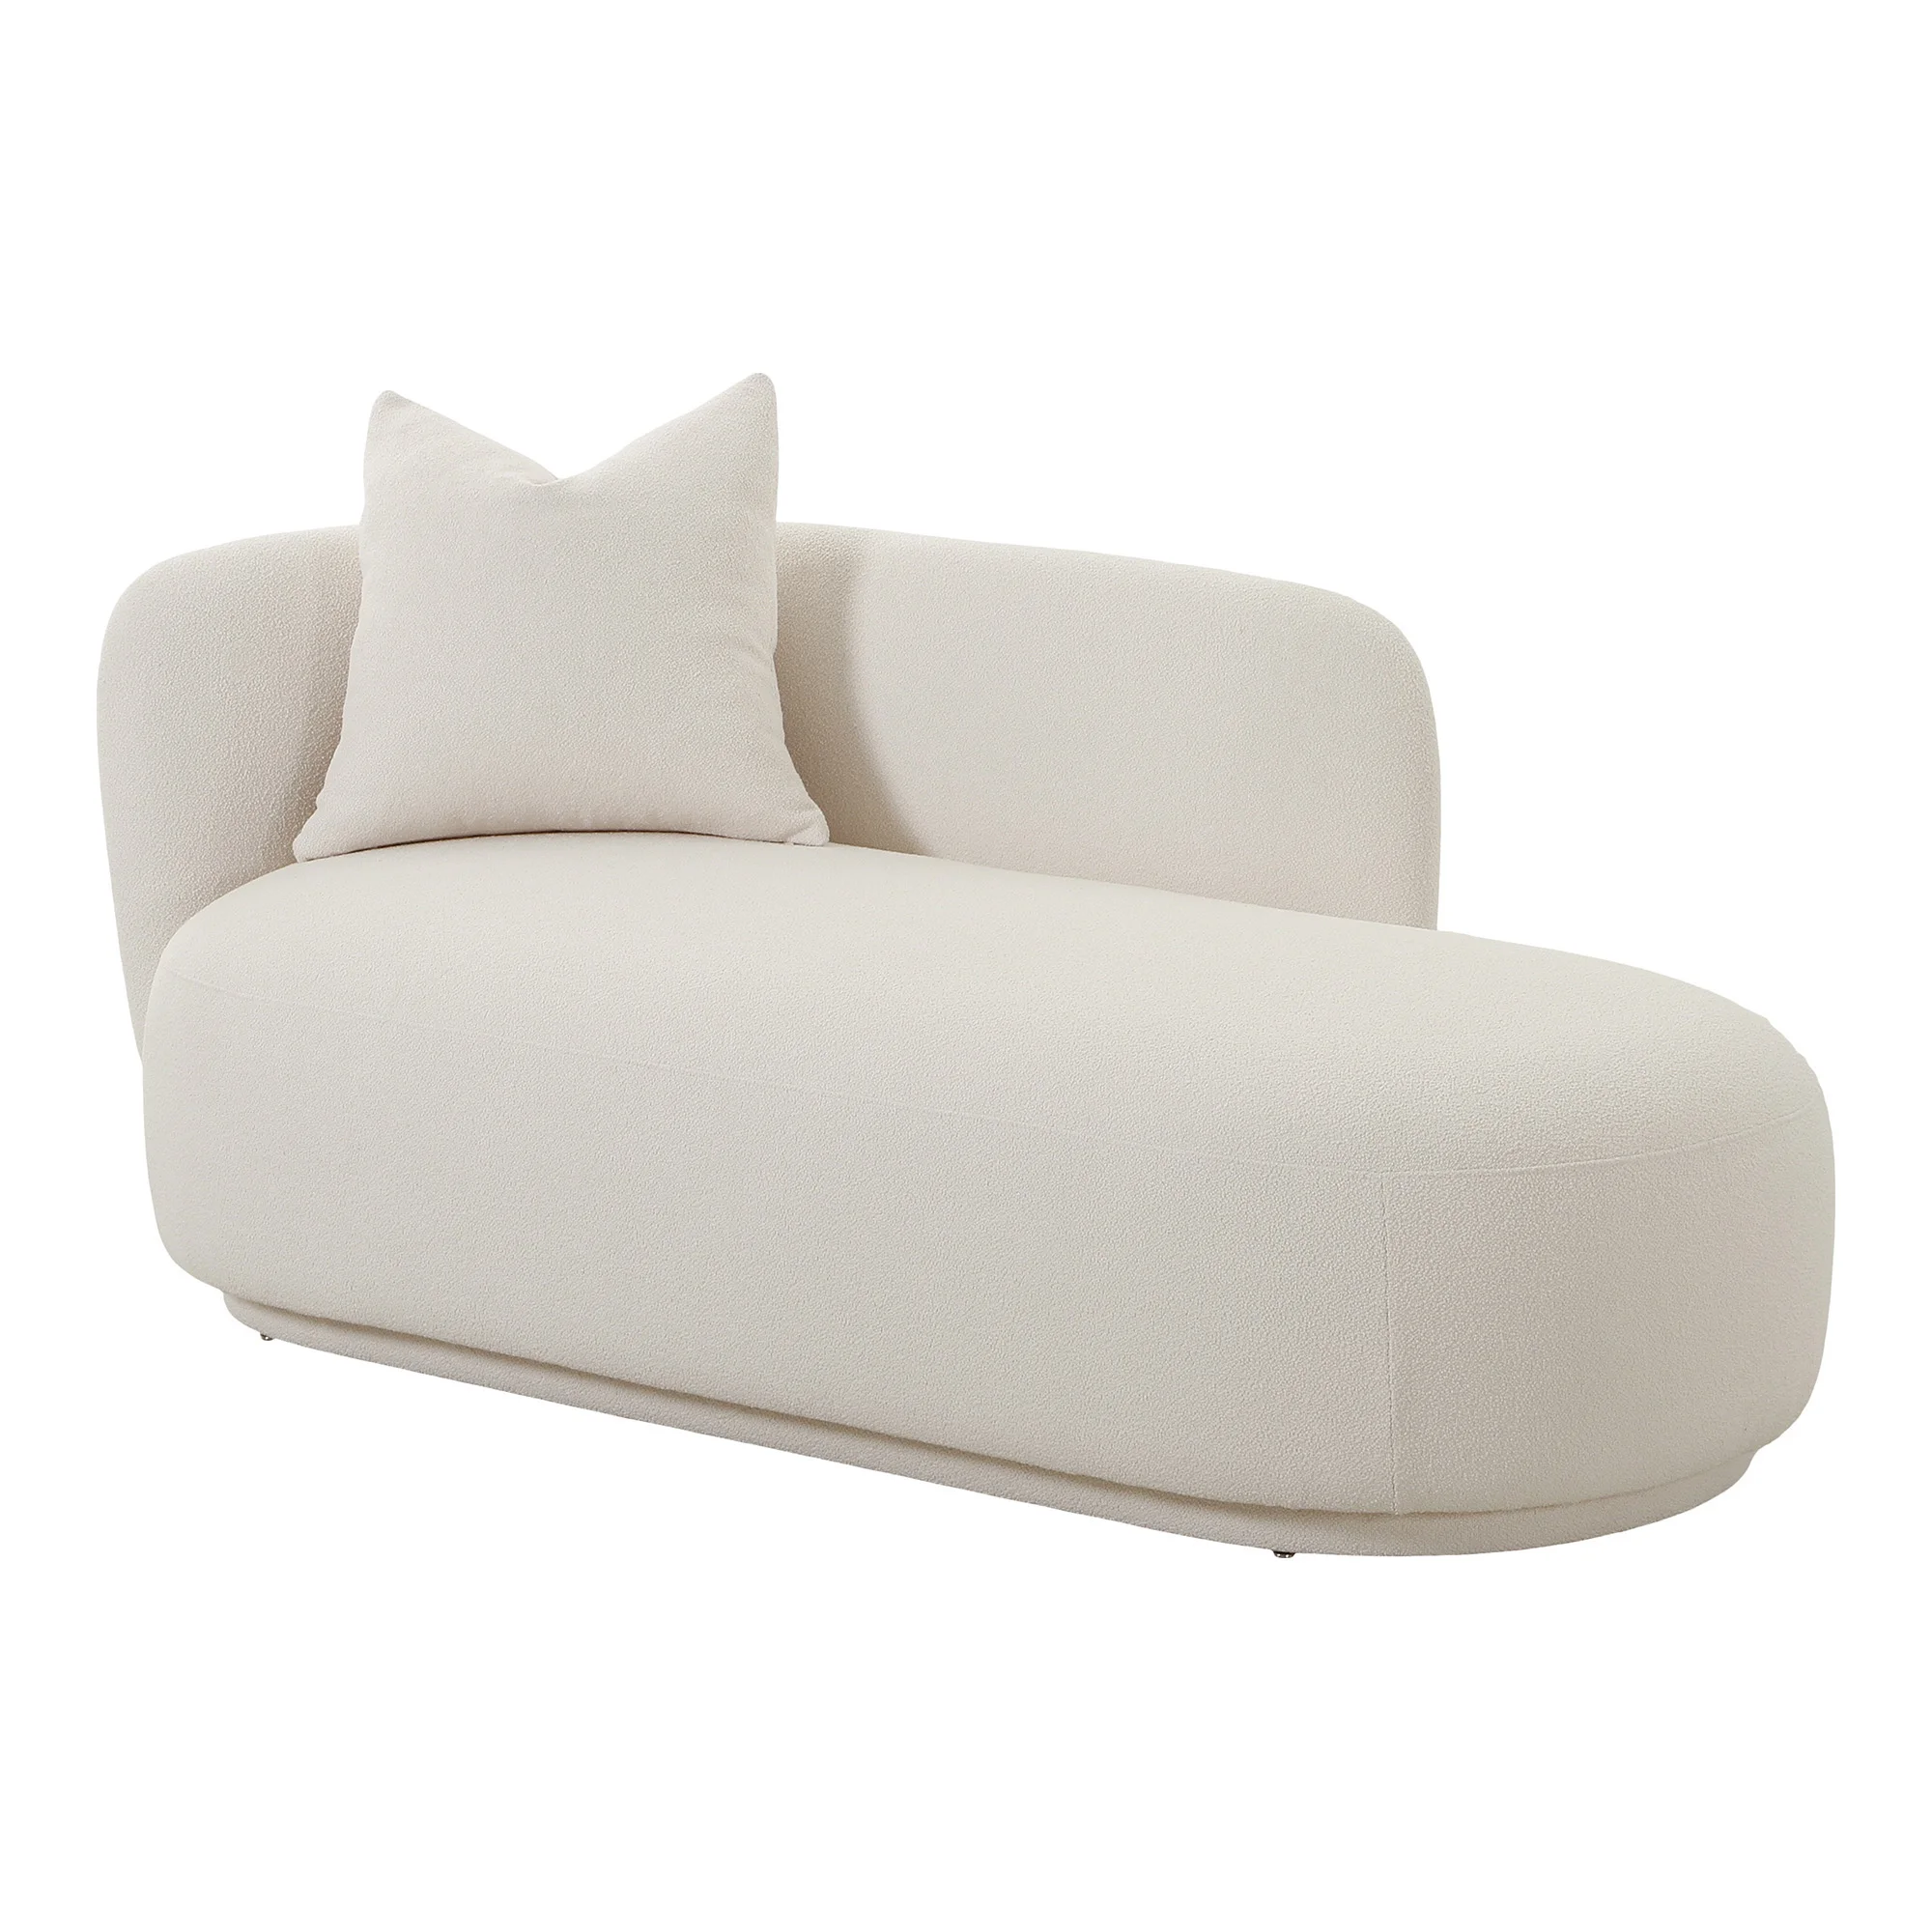 Santorini daybed med pude